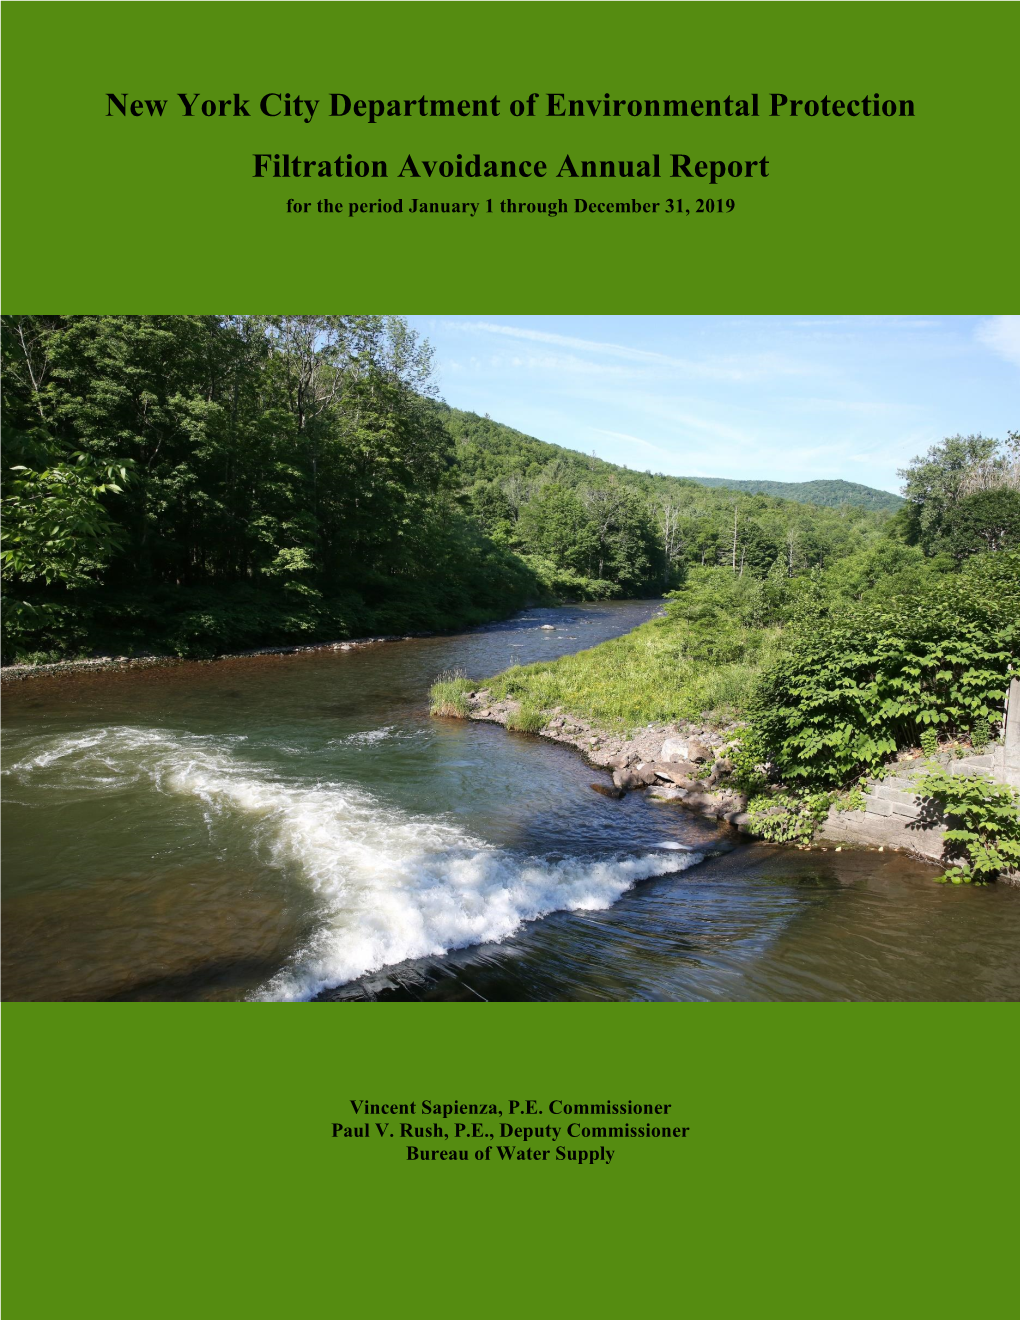 New York City Department of Environmental Protection Filtration Avoidance Annual Report for the Period January 1 Through December 31, 2019